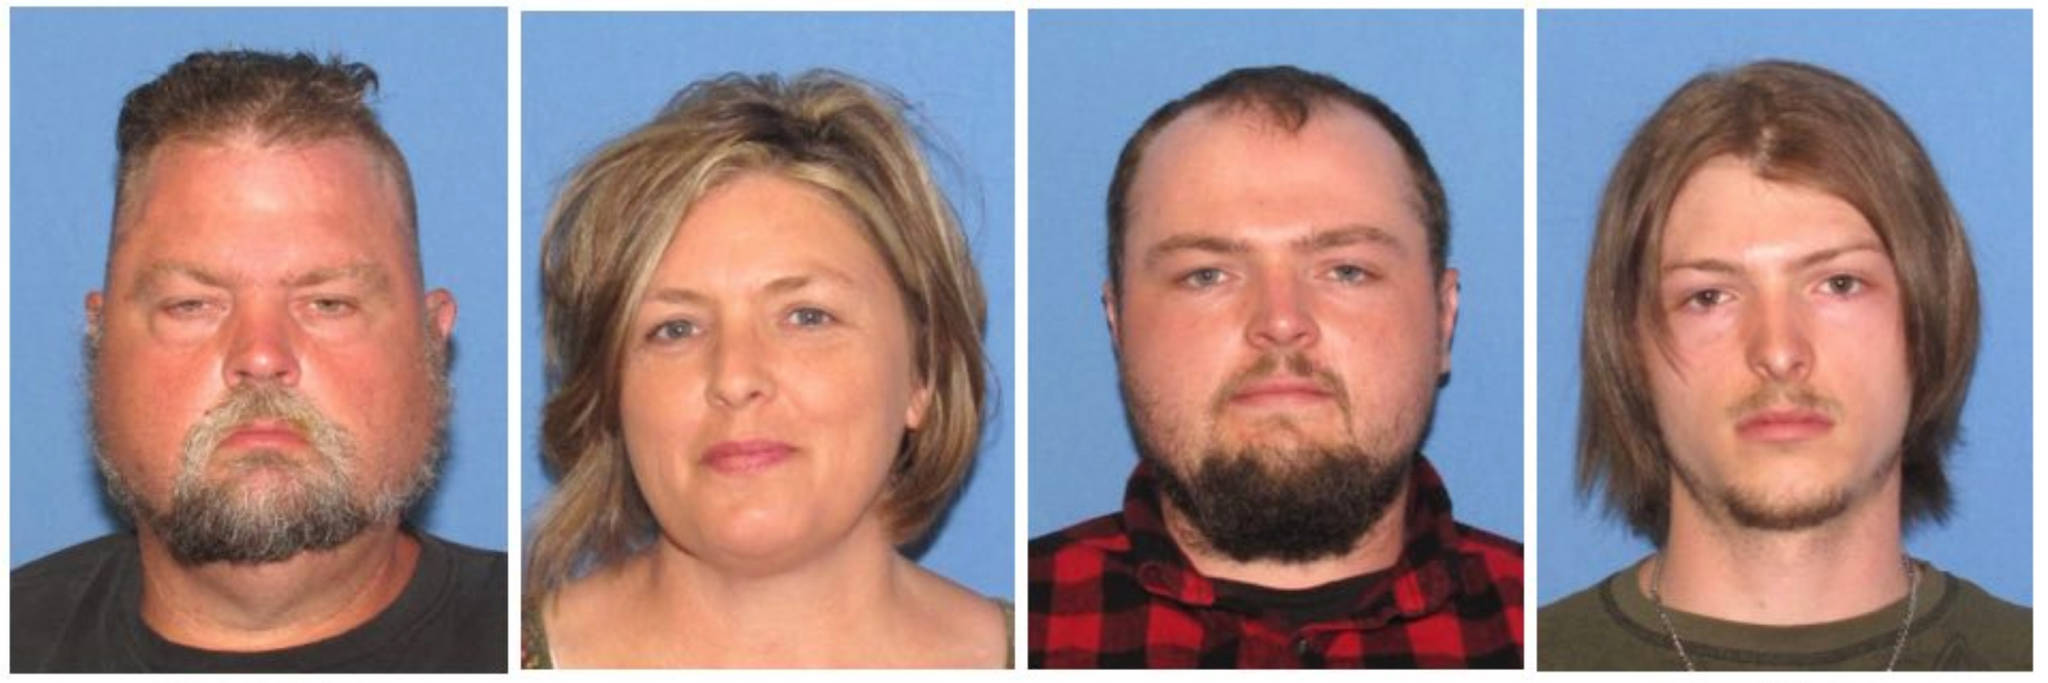 These undated images released by the Ohio Attorney General’s office, show from left, George “Billy” Wagner III, Angela Wagner, George Wagner IV and Edward “Jake” Wagner. Authorities announced Tuesday that the family of four has been arrested in the slayings of eight members of one family in rural Ohio two years ago. (Ohio Attorney General’s office via AP)